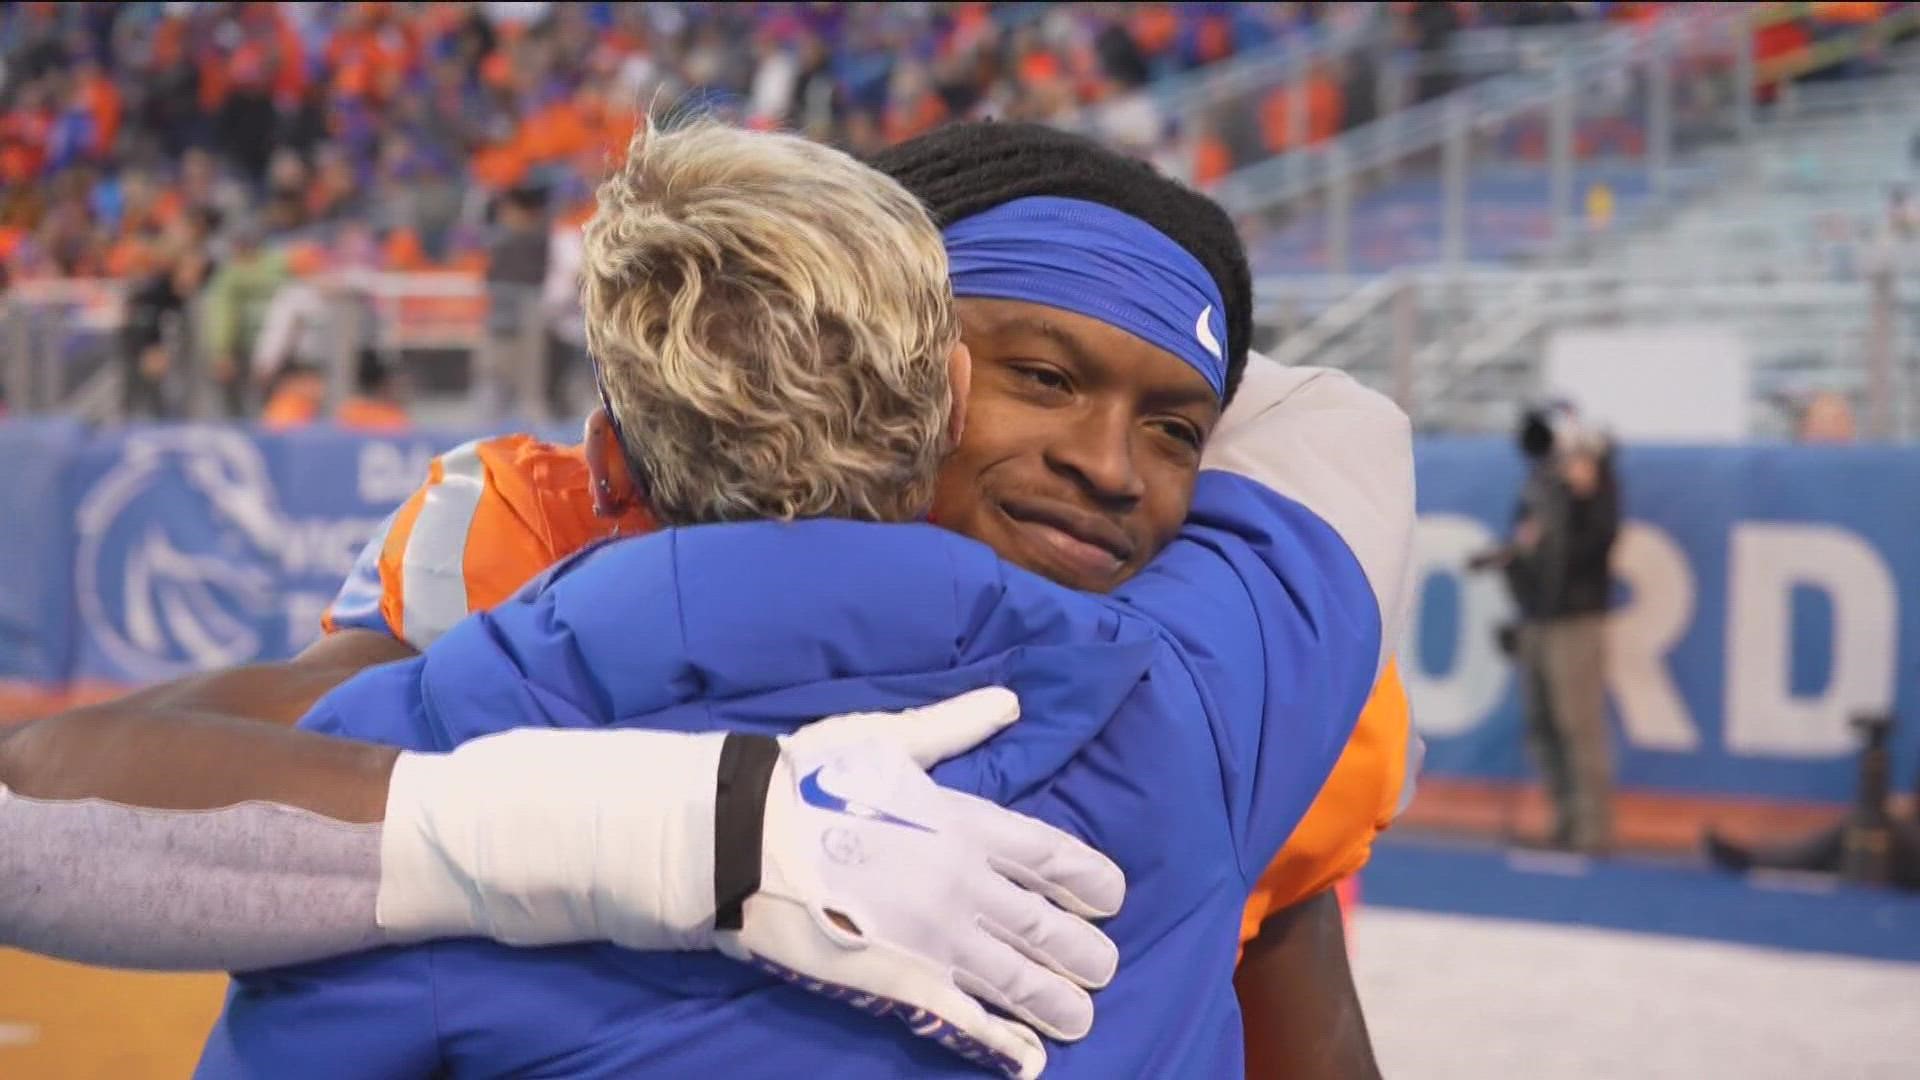 Boise State will recognize 25 seniors Friday at Albertsons Stadium. Based on the words of DC Spencer Danielson, the most-emotional farewell may be Jones' goodbye.